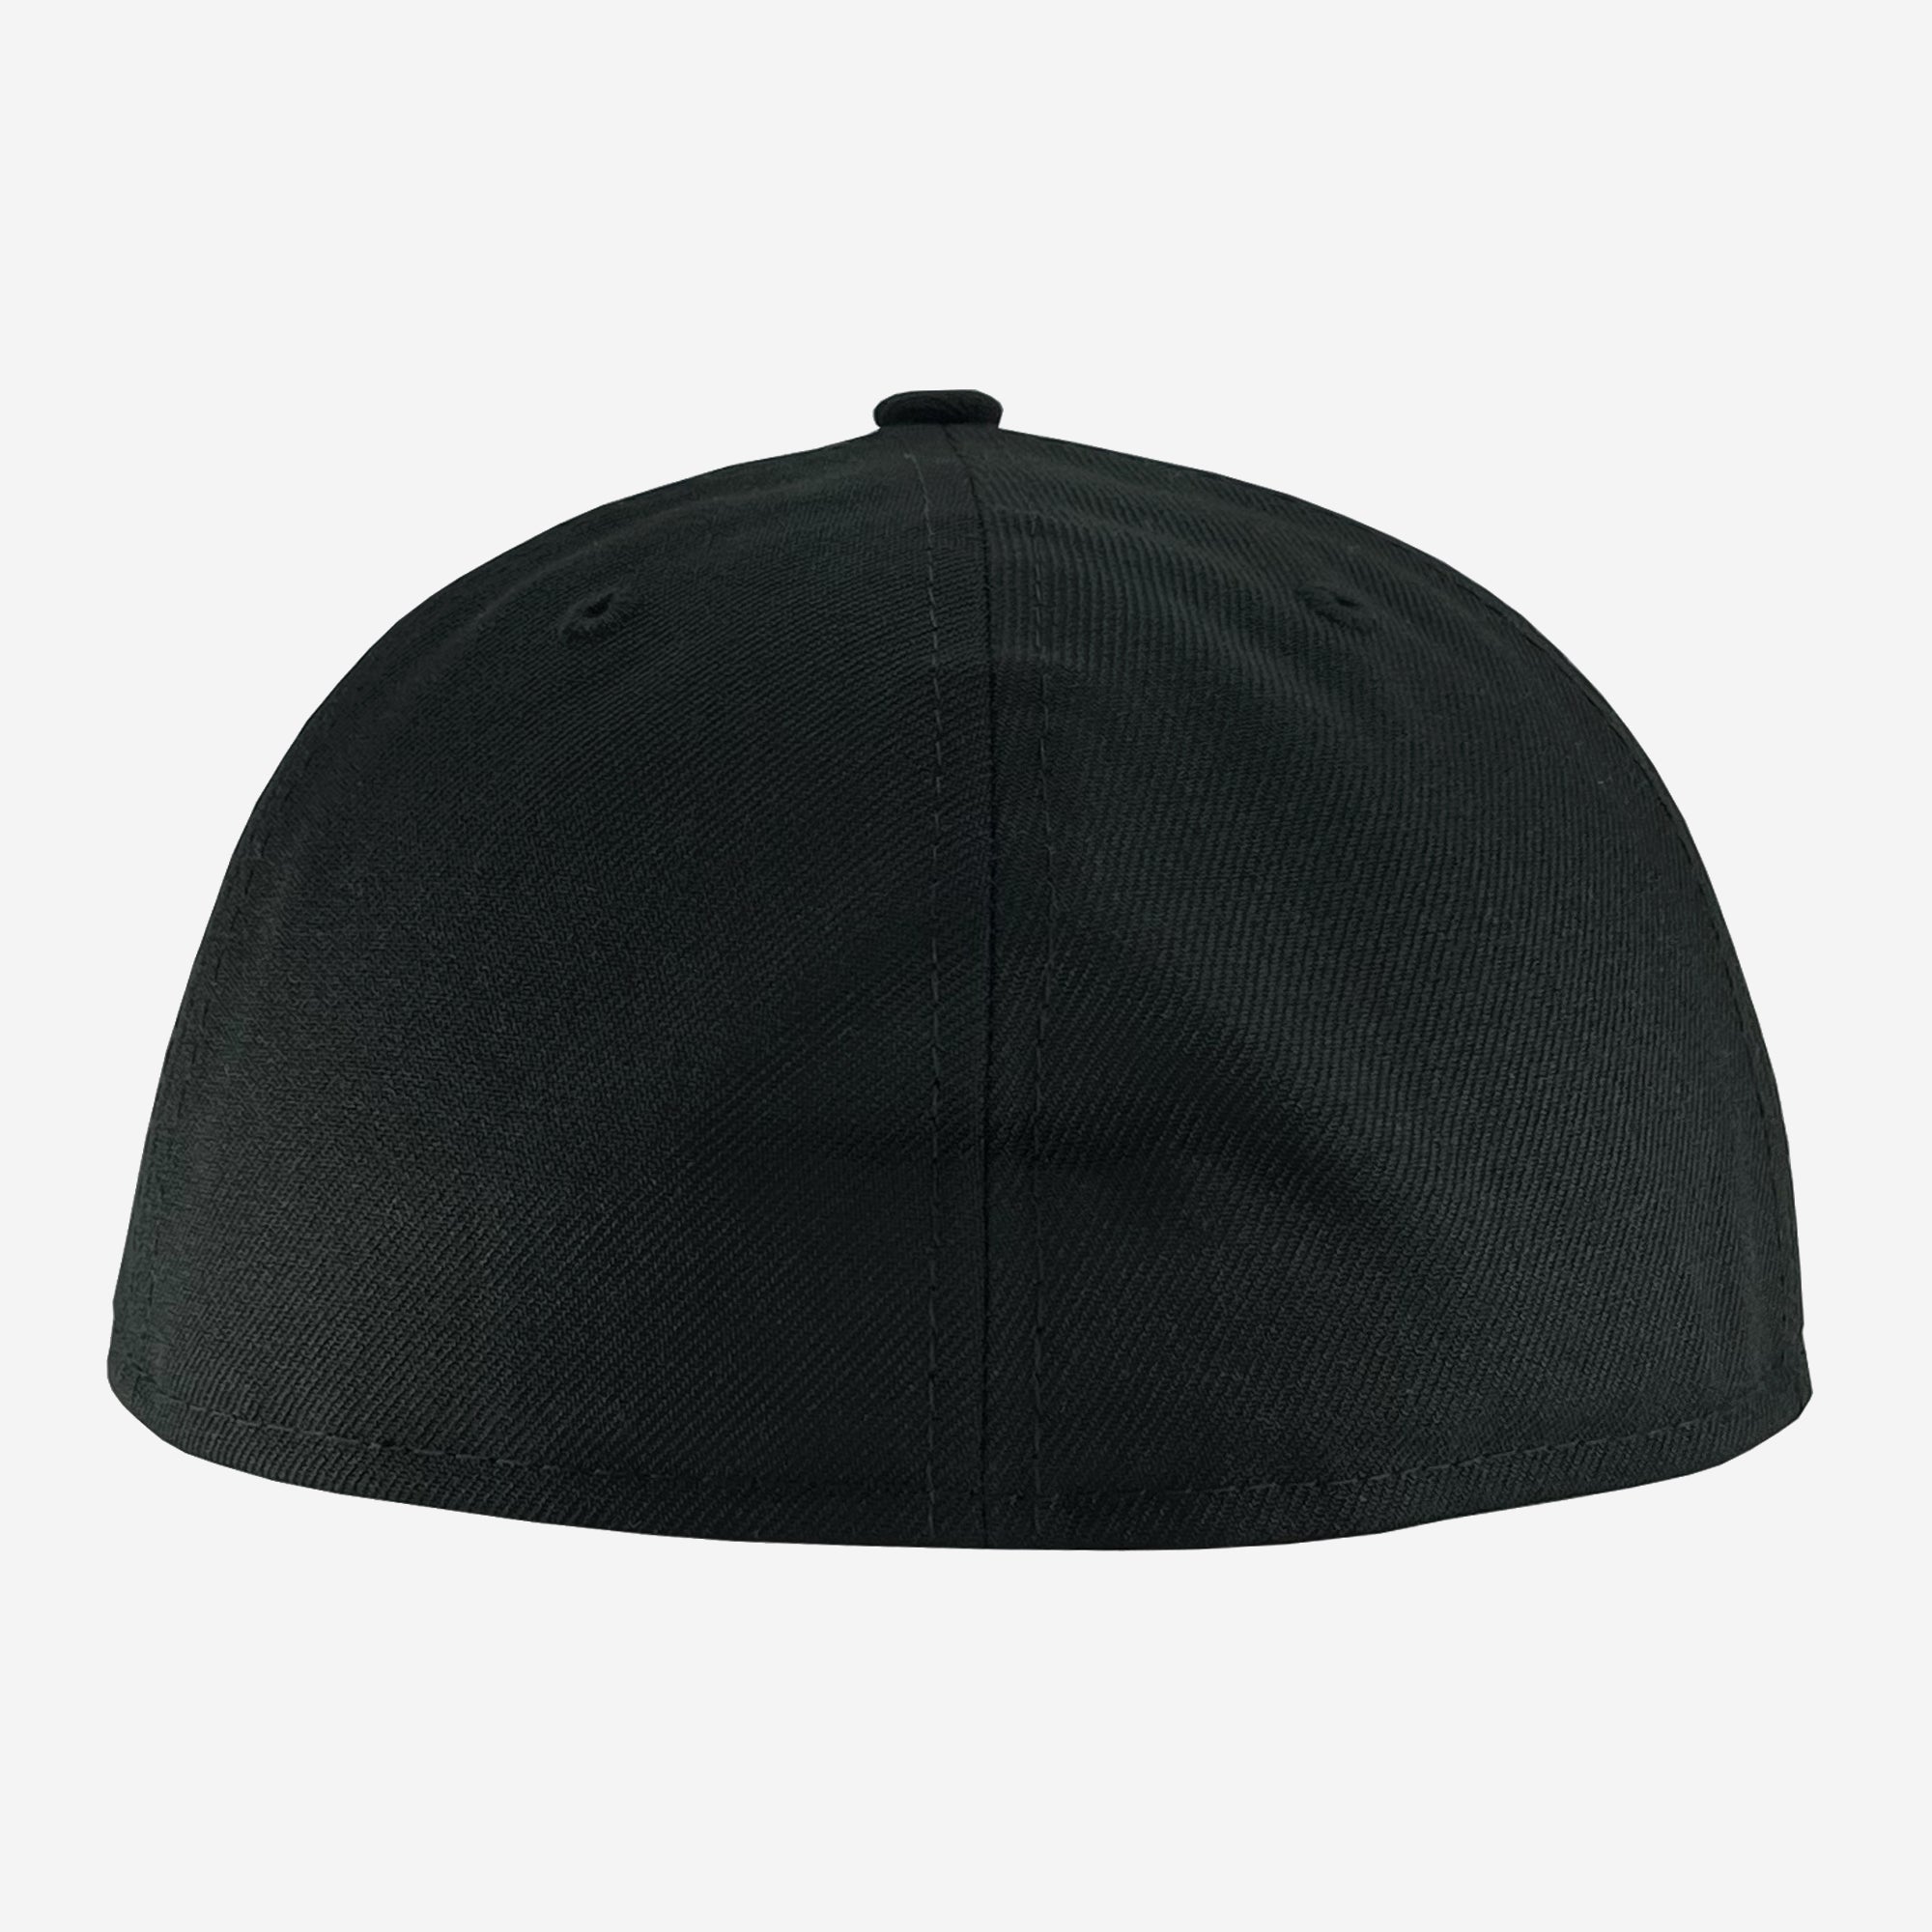 The backside of a black fitted cap.